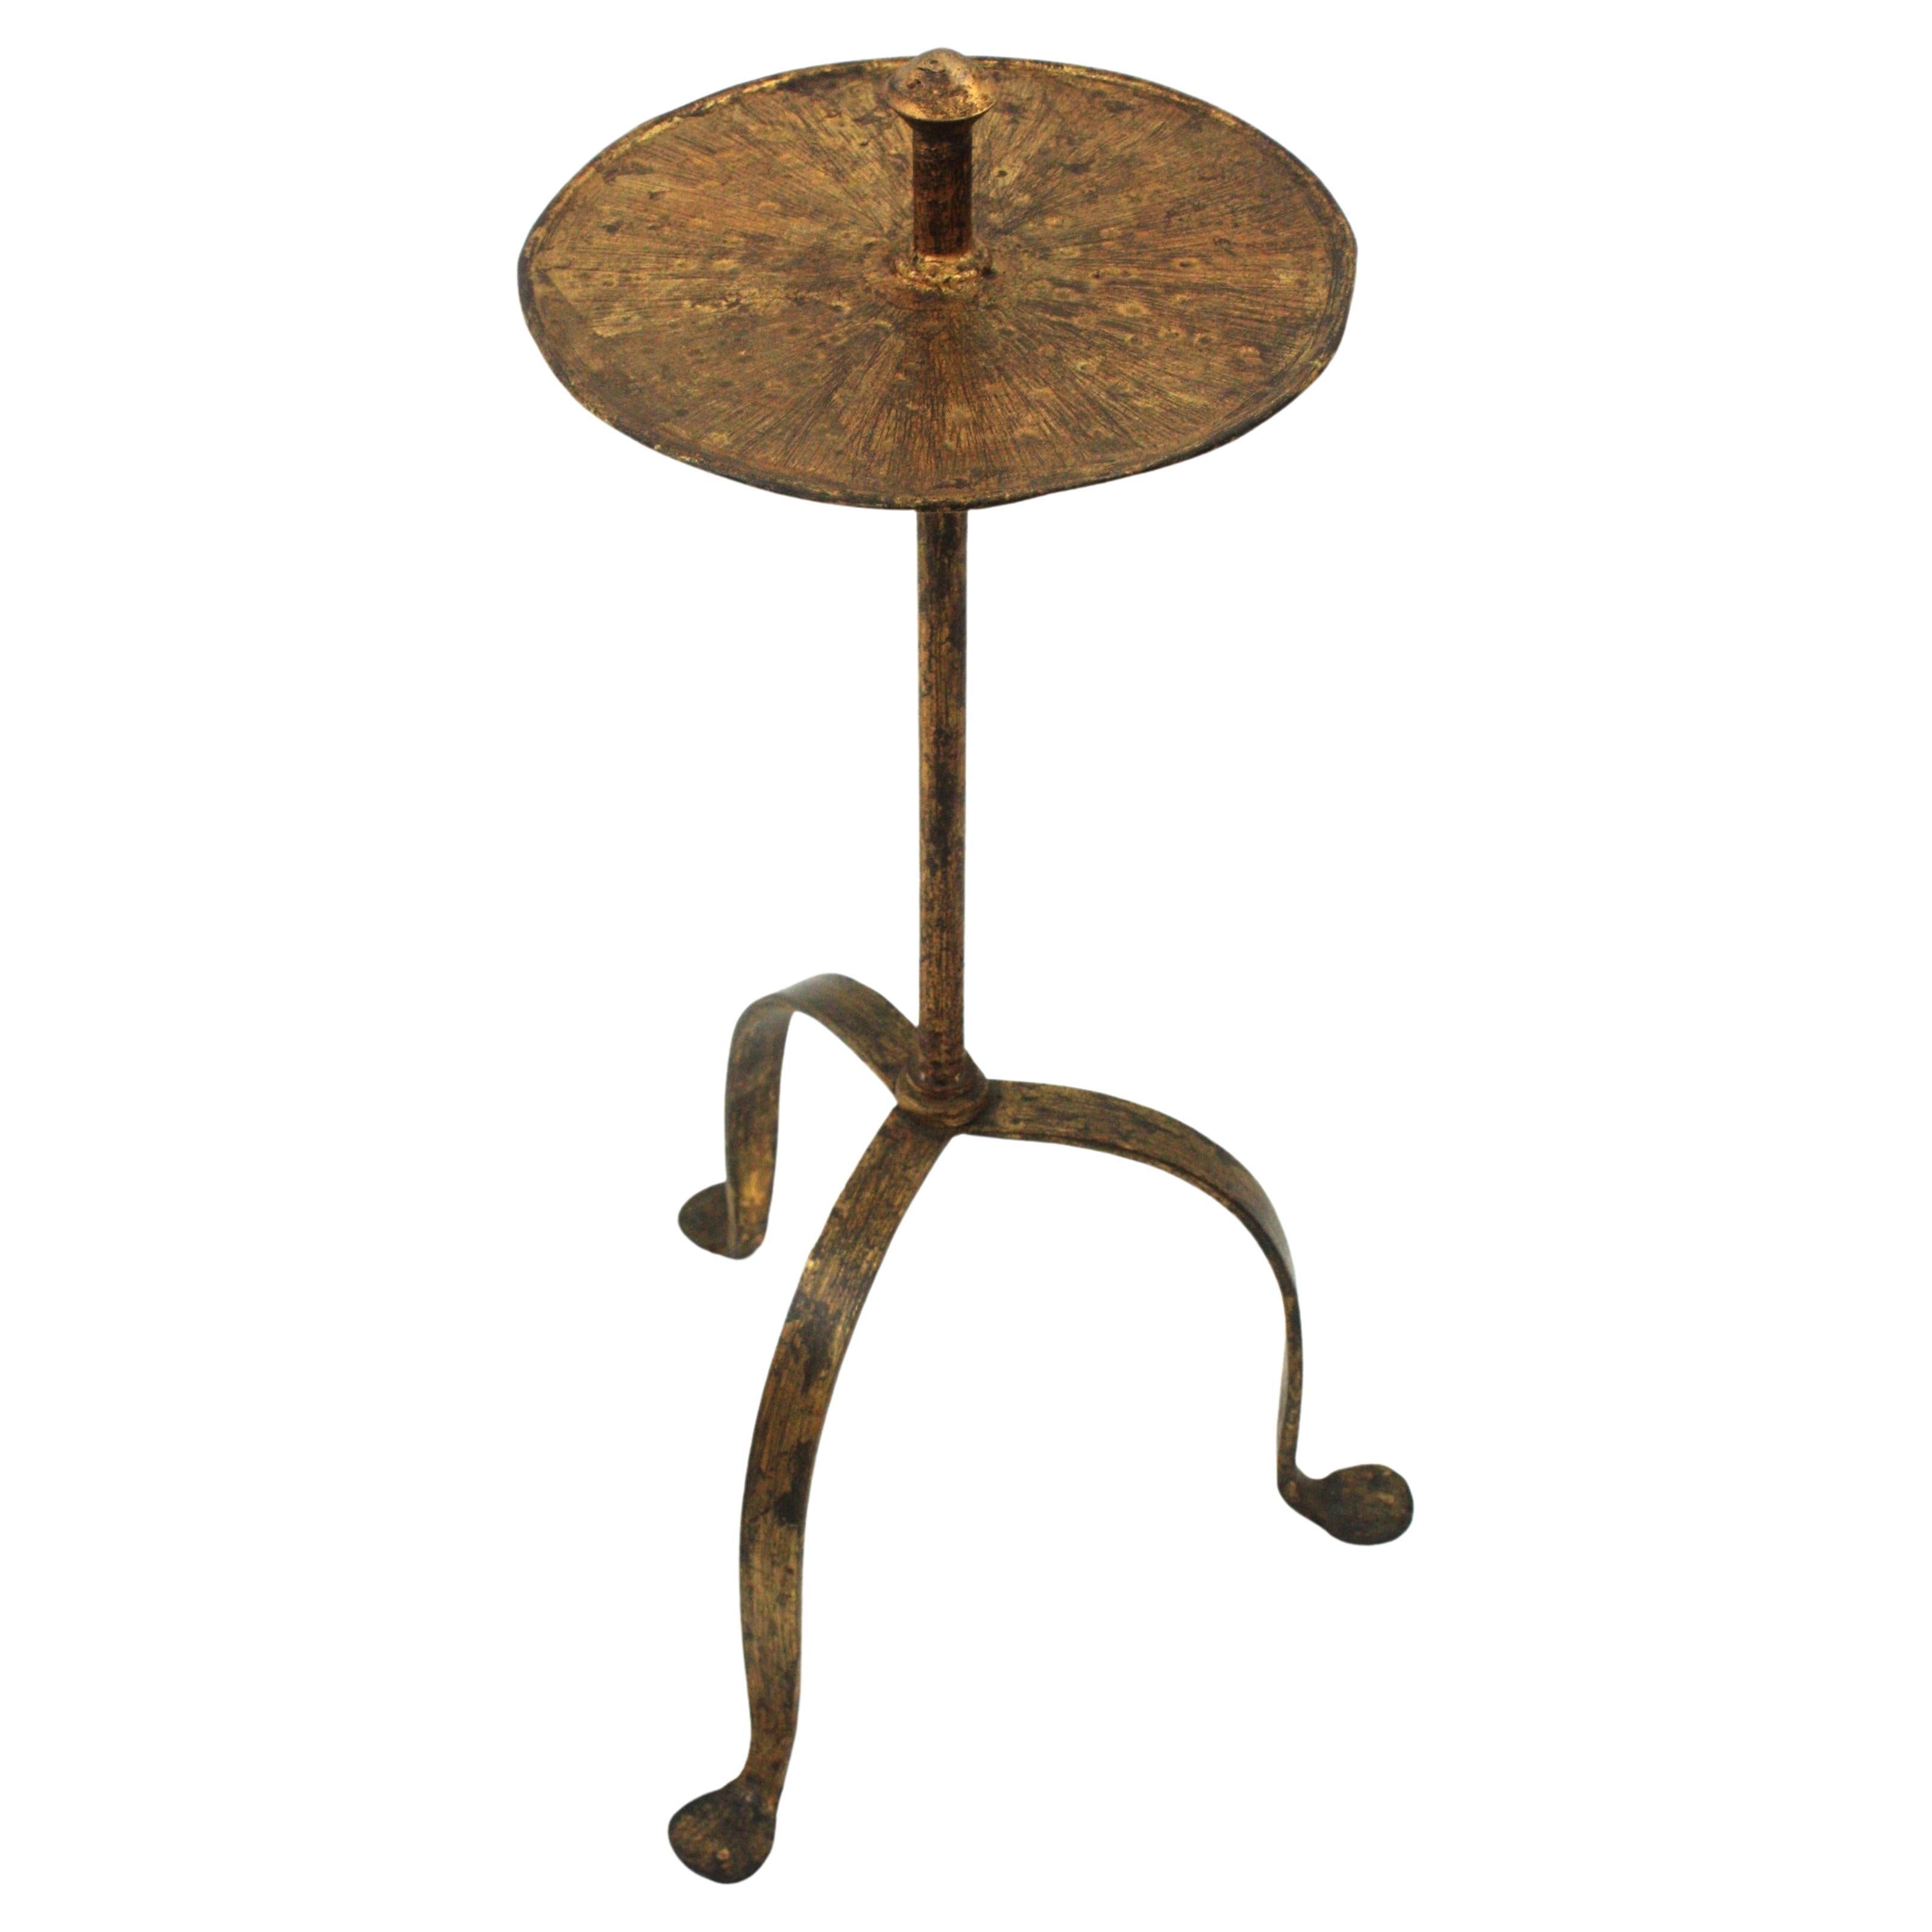 Gothic Revival Spanish 1940s Wrought Iron Gilt Drinks Table / Side Table, Handle Detail For Sale